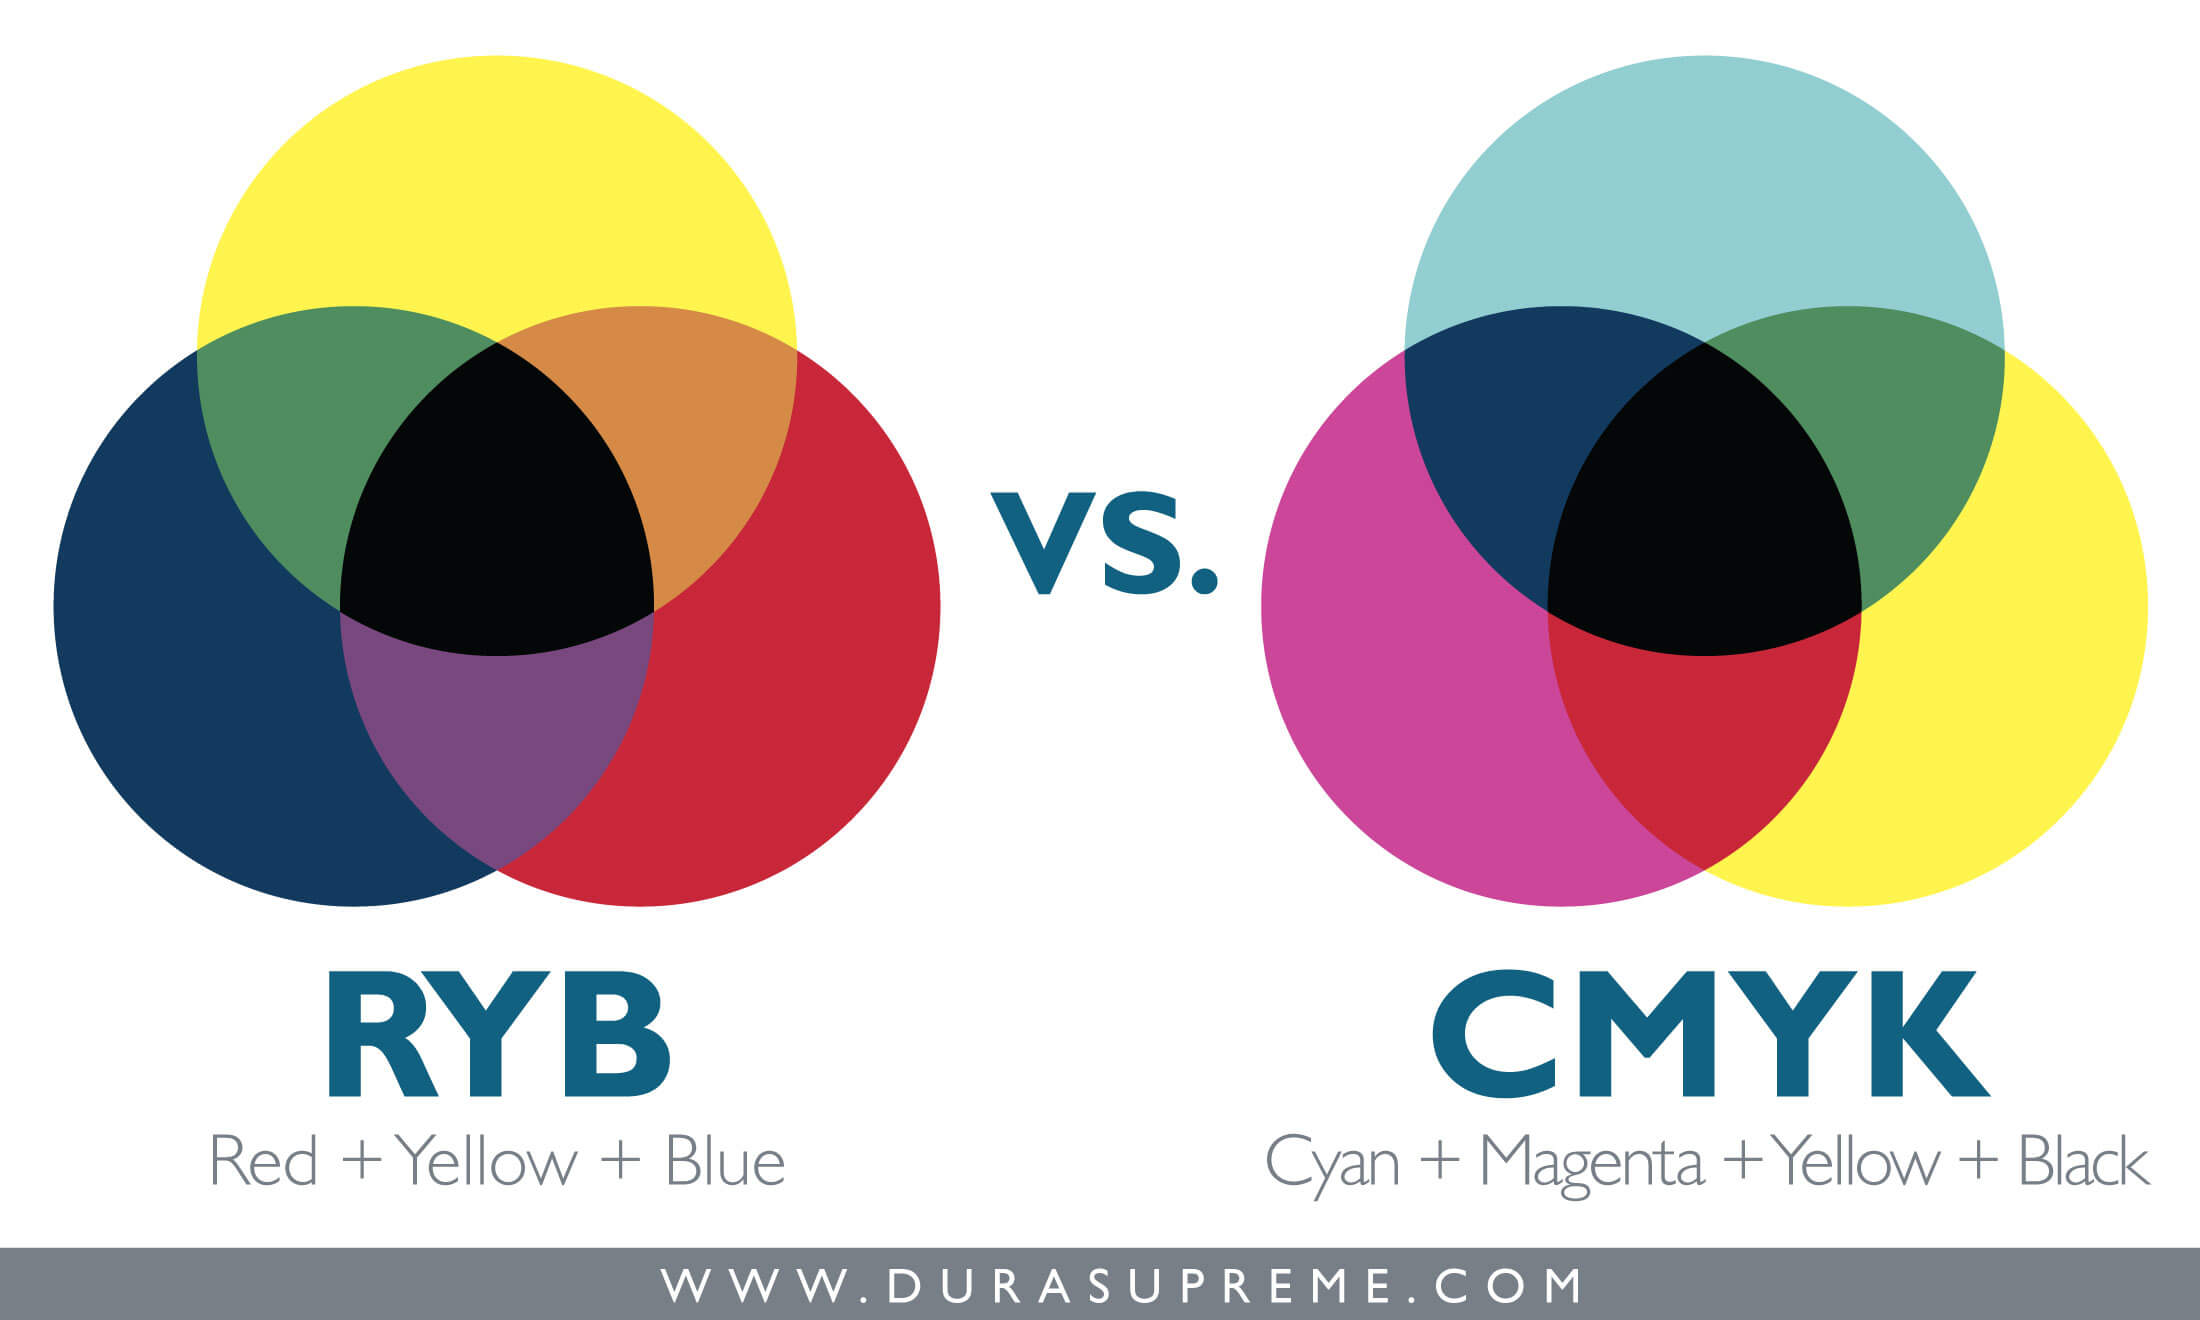 Color Theory Lessons for Interior design. RYB paint colors vs. CMYK print colors.